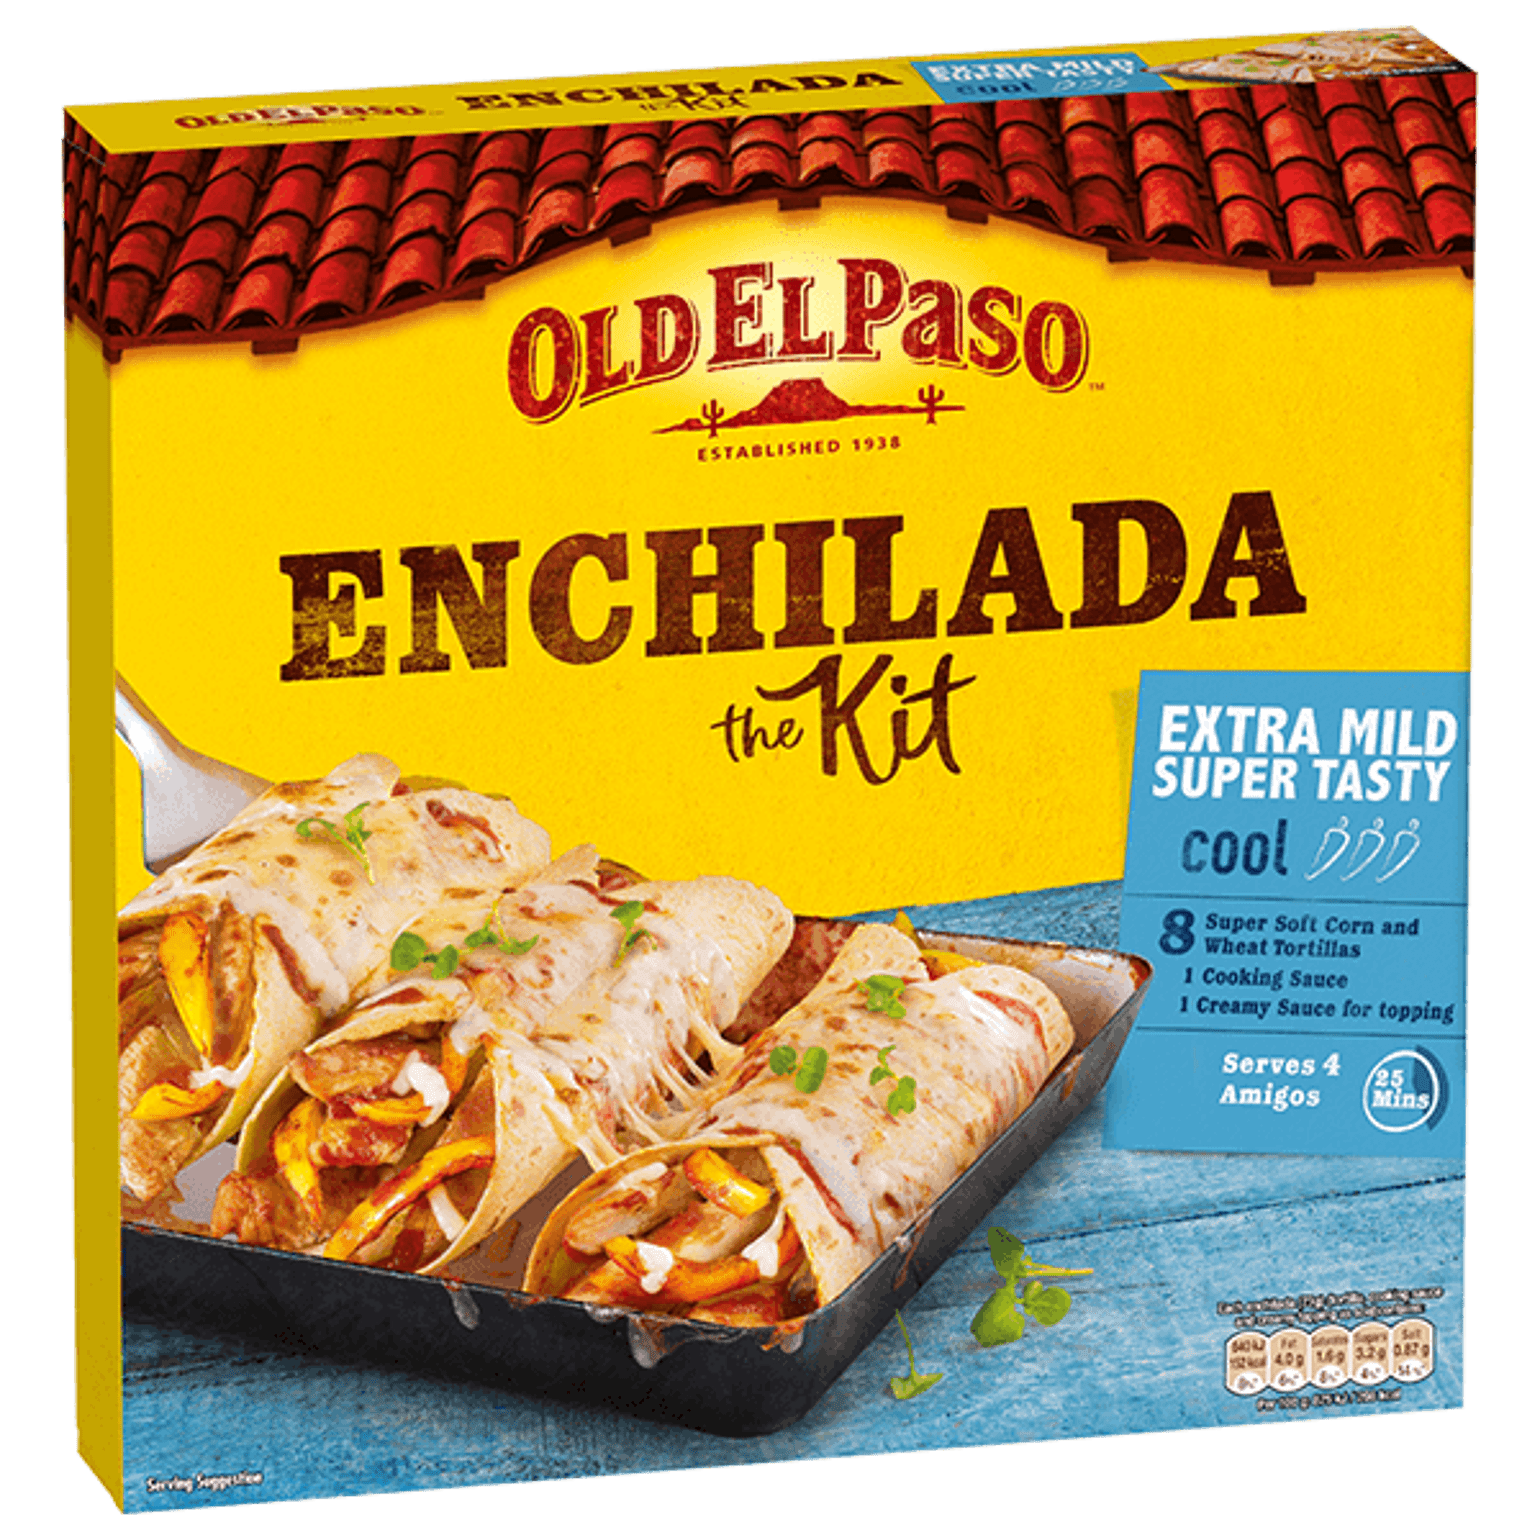 pack of Old El Paso's extra mild super tasty Enchilada kit containing super soft corn & wheat tortillas, cooking sauce & creamy sauce (585g)